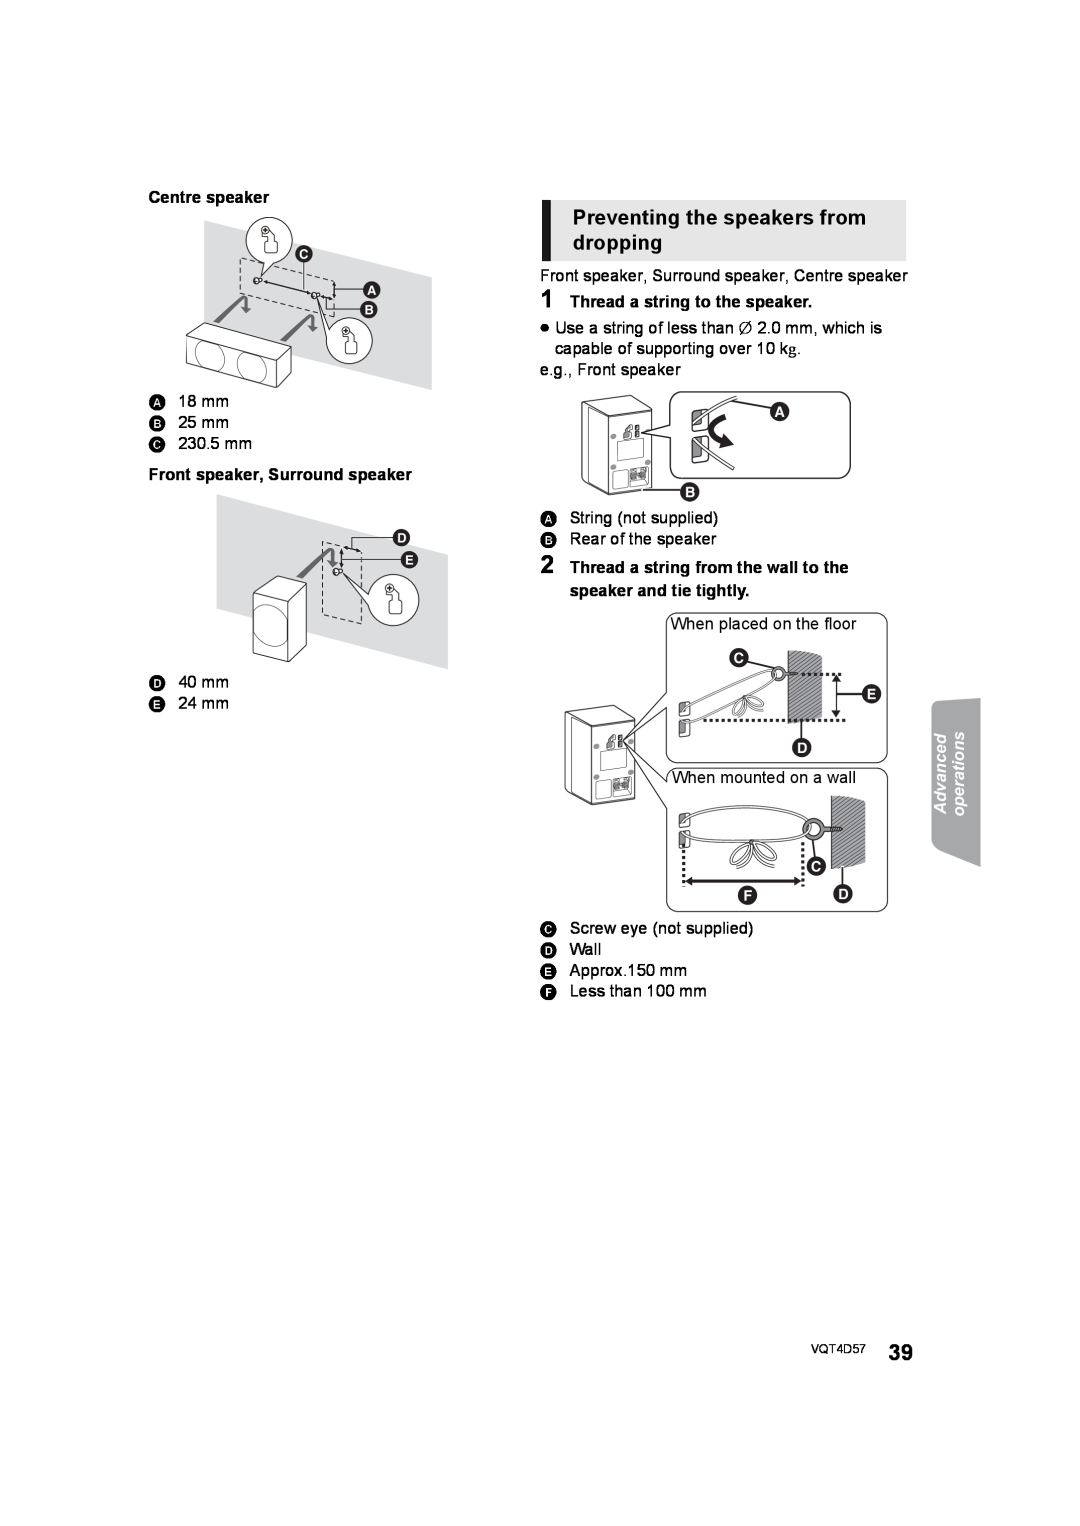 Panasonic SC-BTT190 manual Preventing the speakers from dropping,   ,   ,   , Advanced, operations 